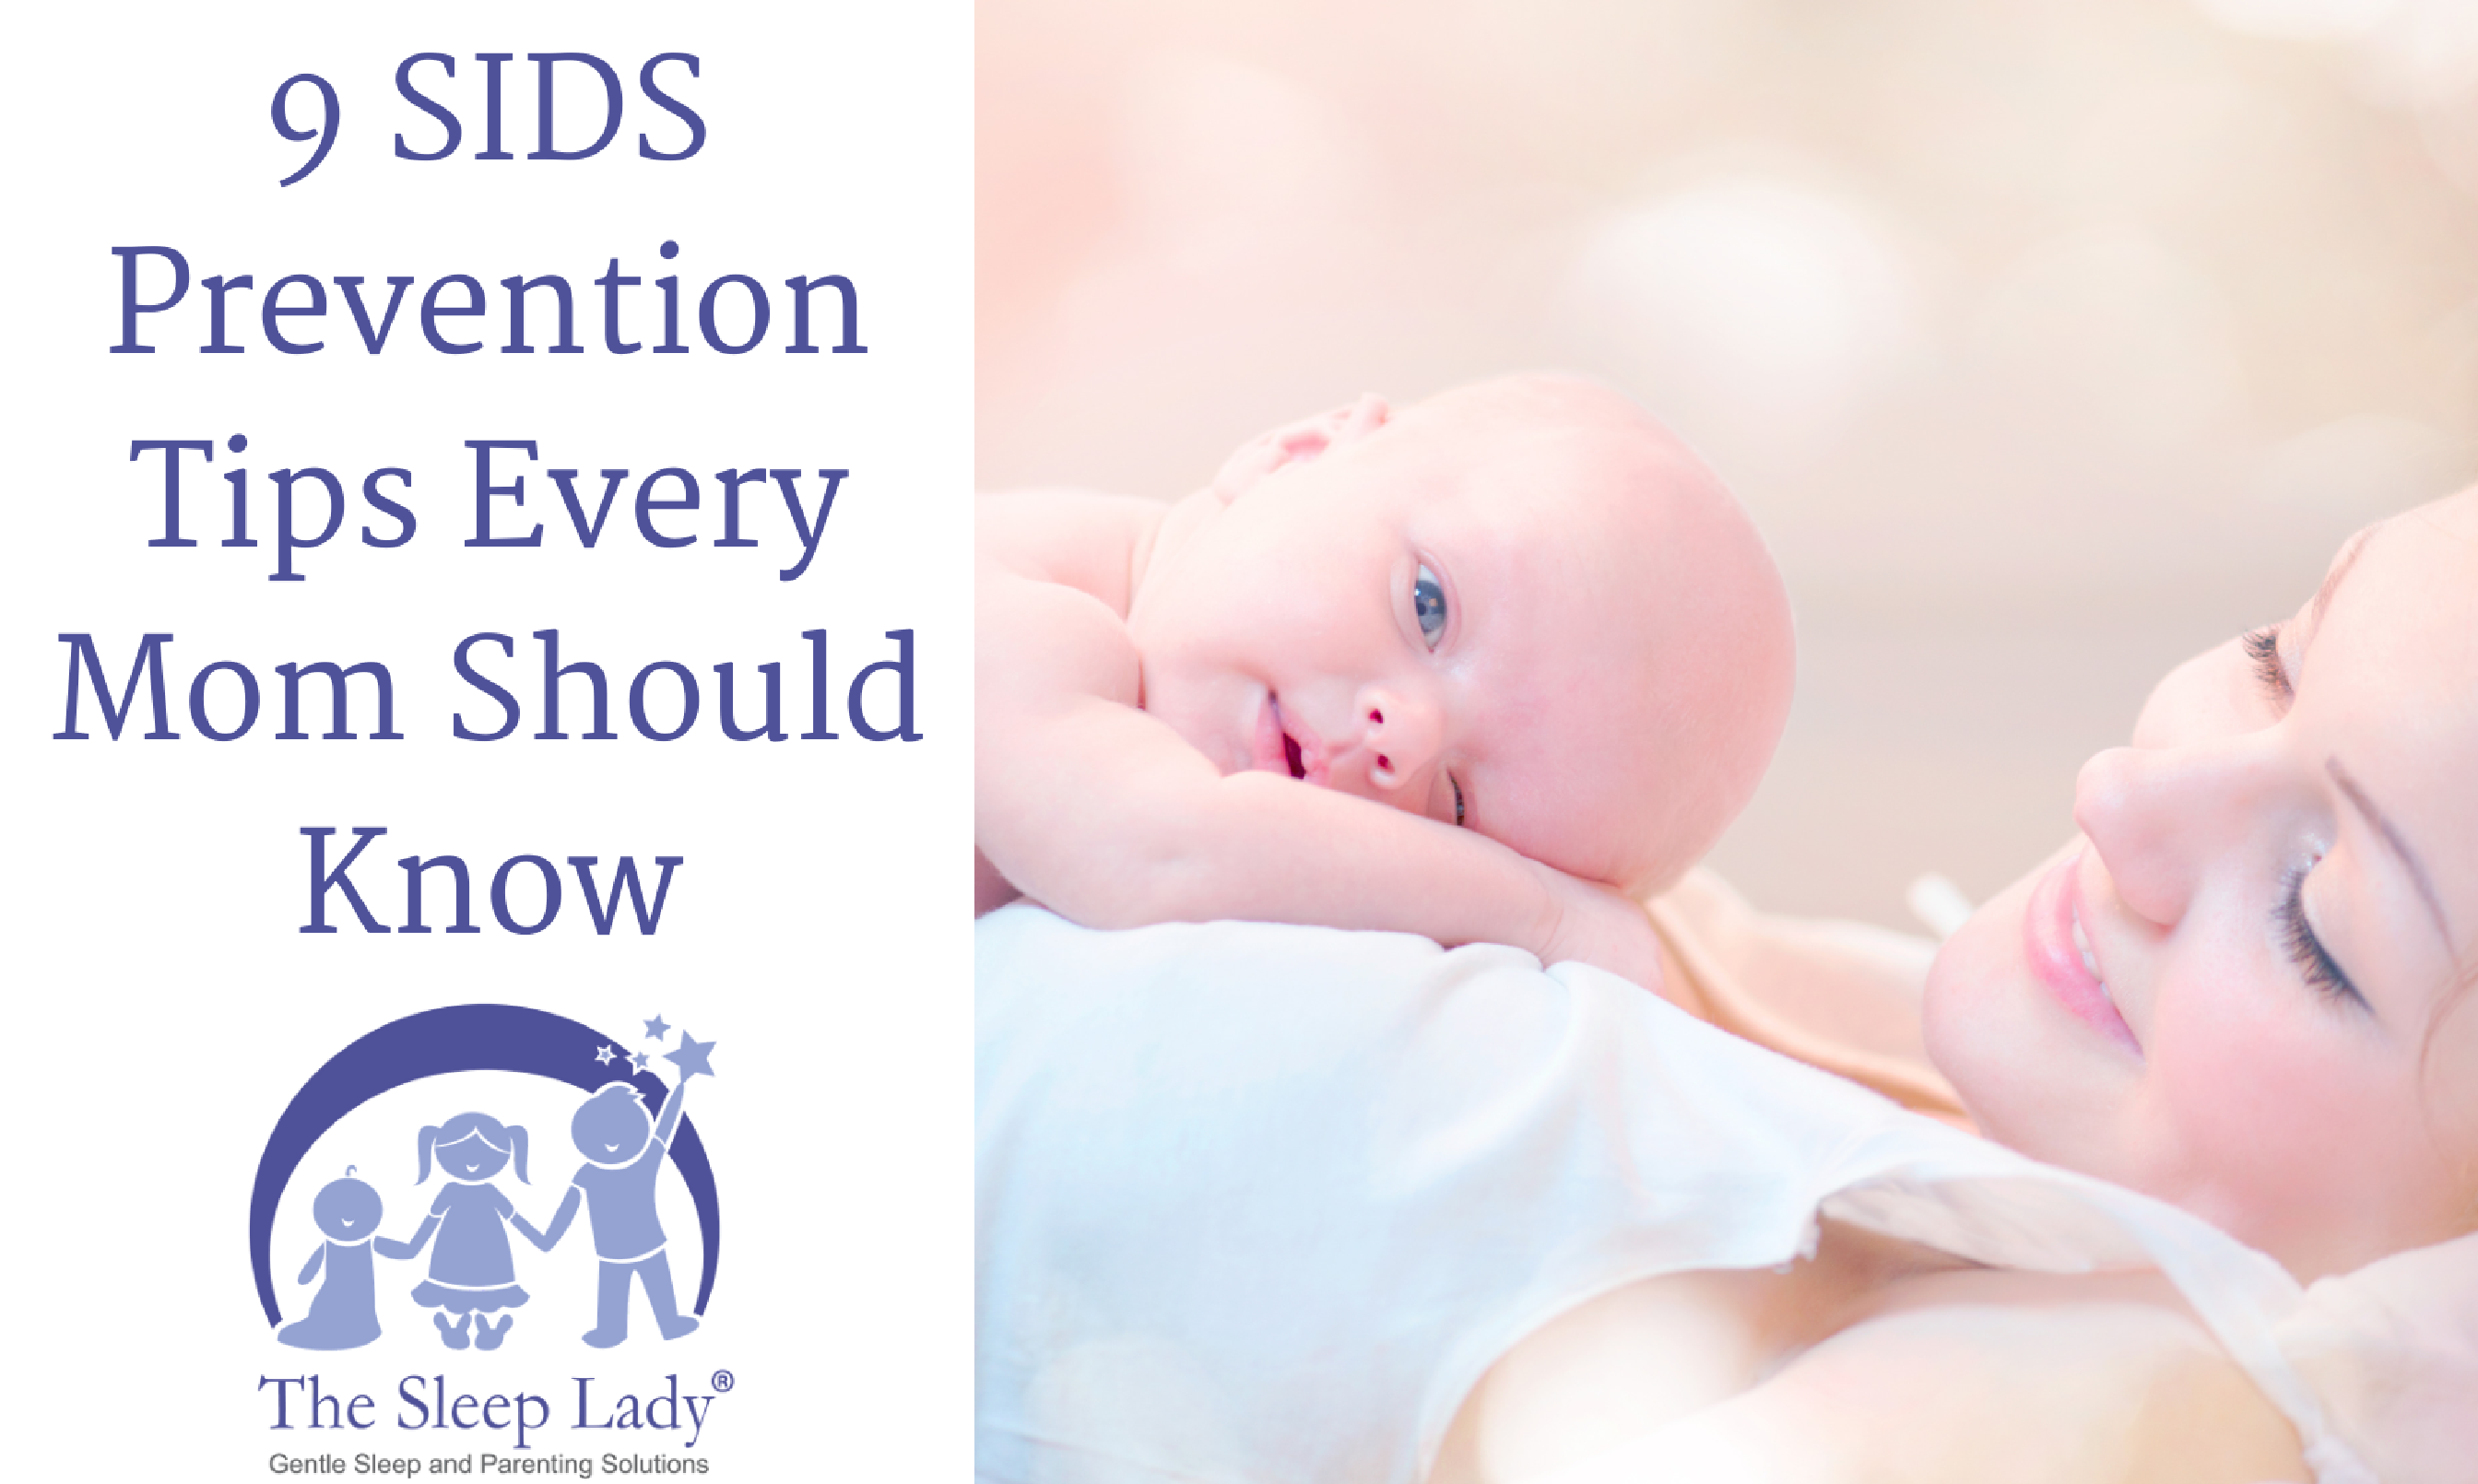 Newborn Sleep: 9 SIDS Prevention Tips Every Mom Should Know